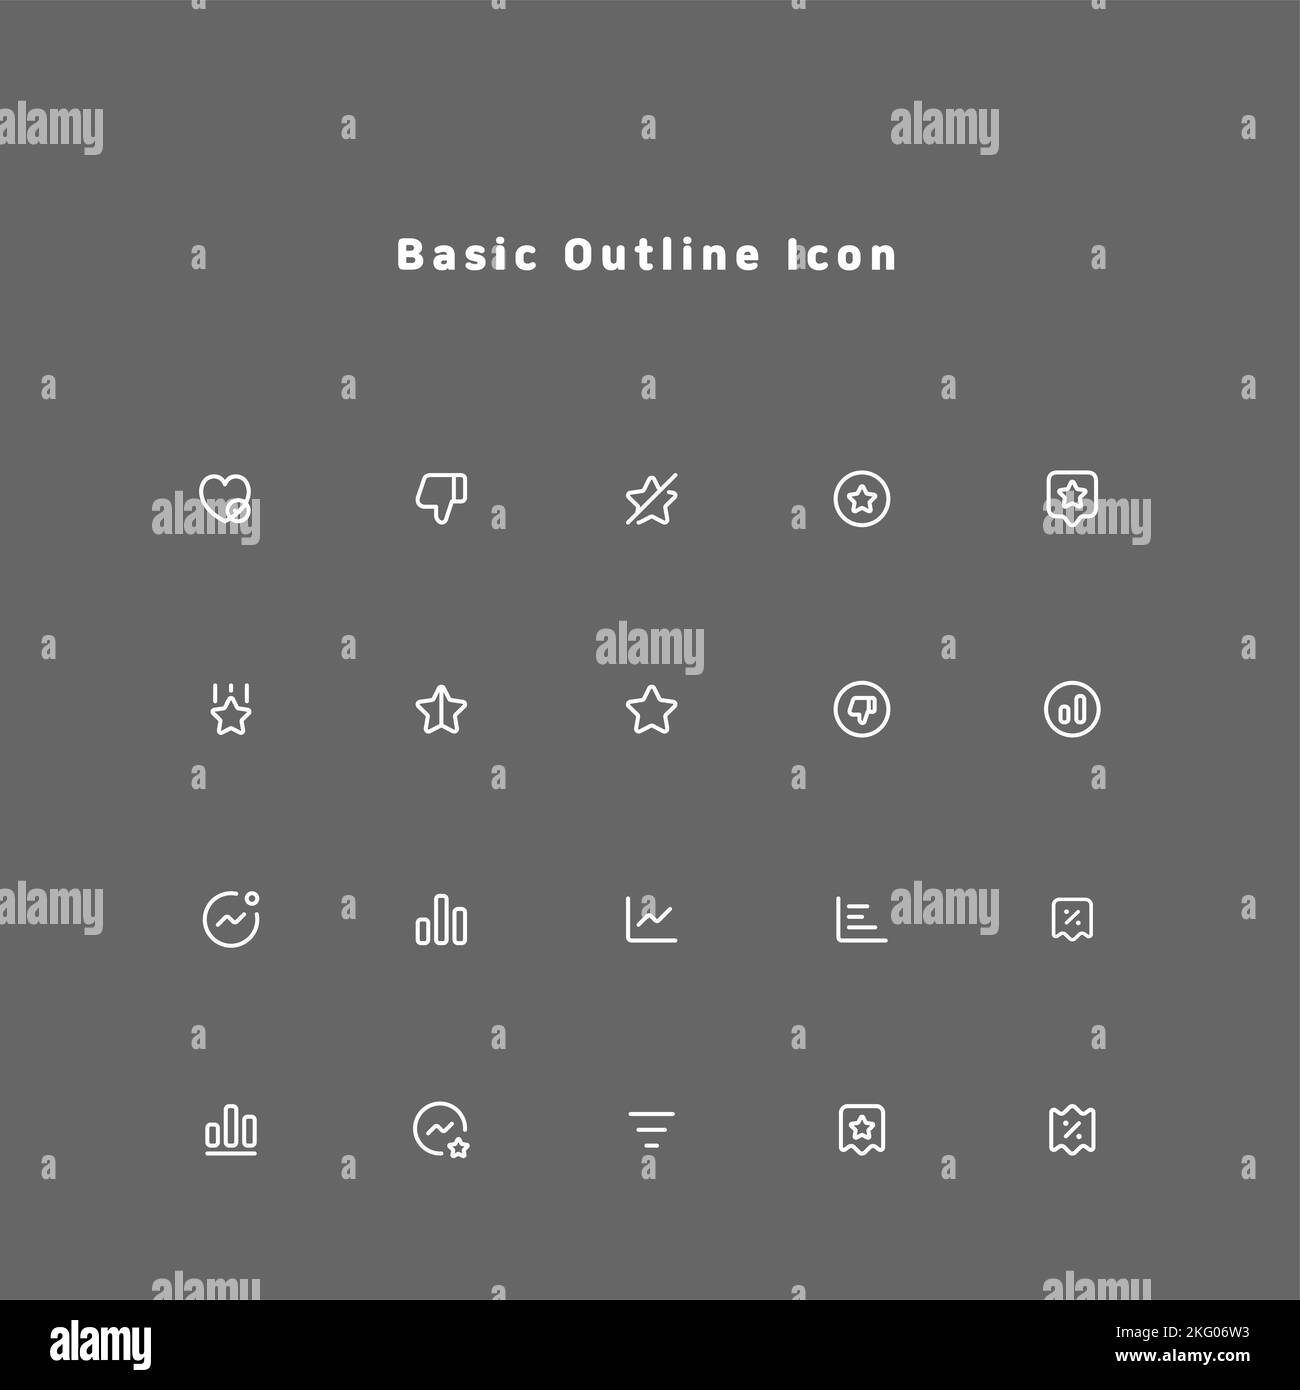 simple and minimal basic essential line icon set for ui ux web and mobile interface Stock Photo